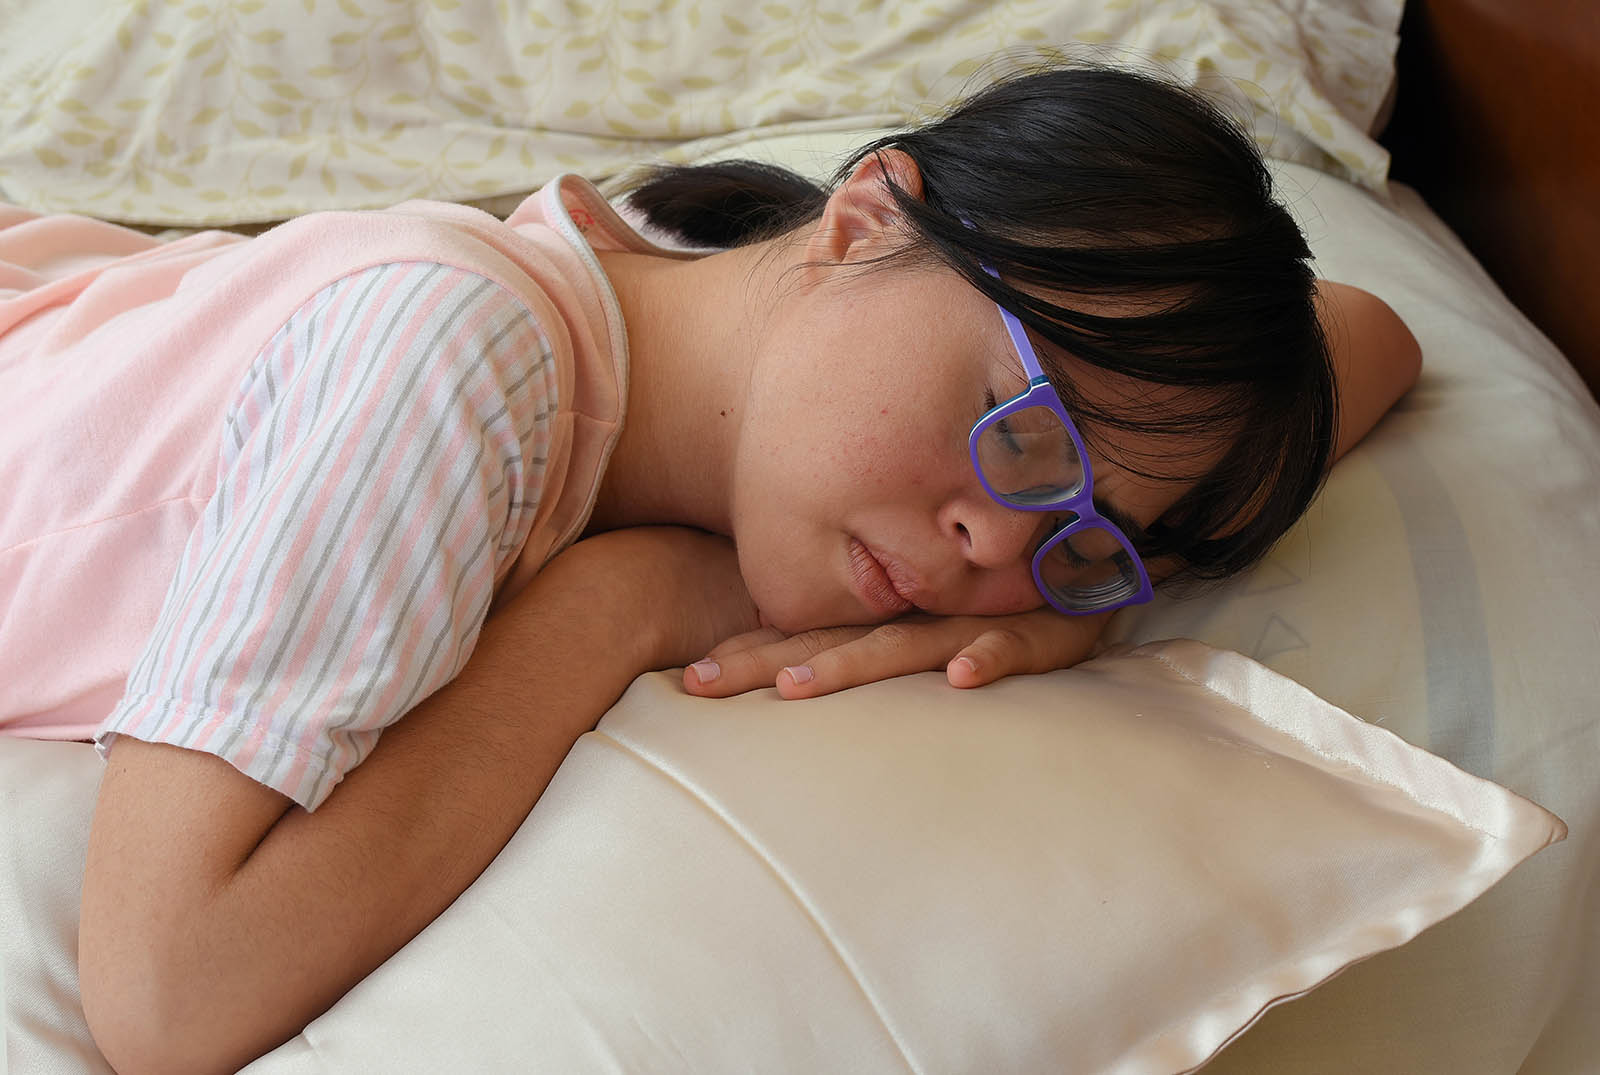 Adolescent with Down syndrome sleeping